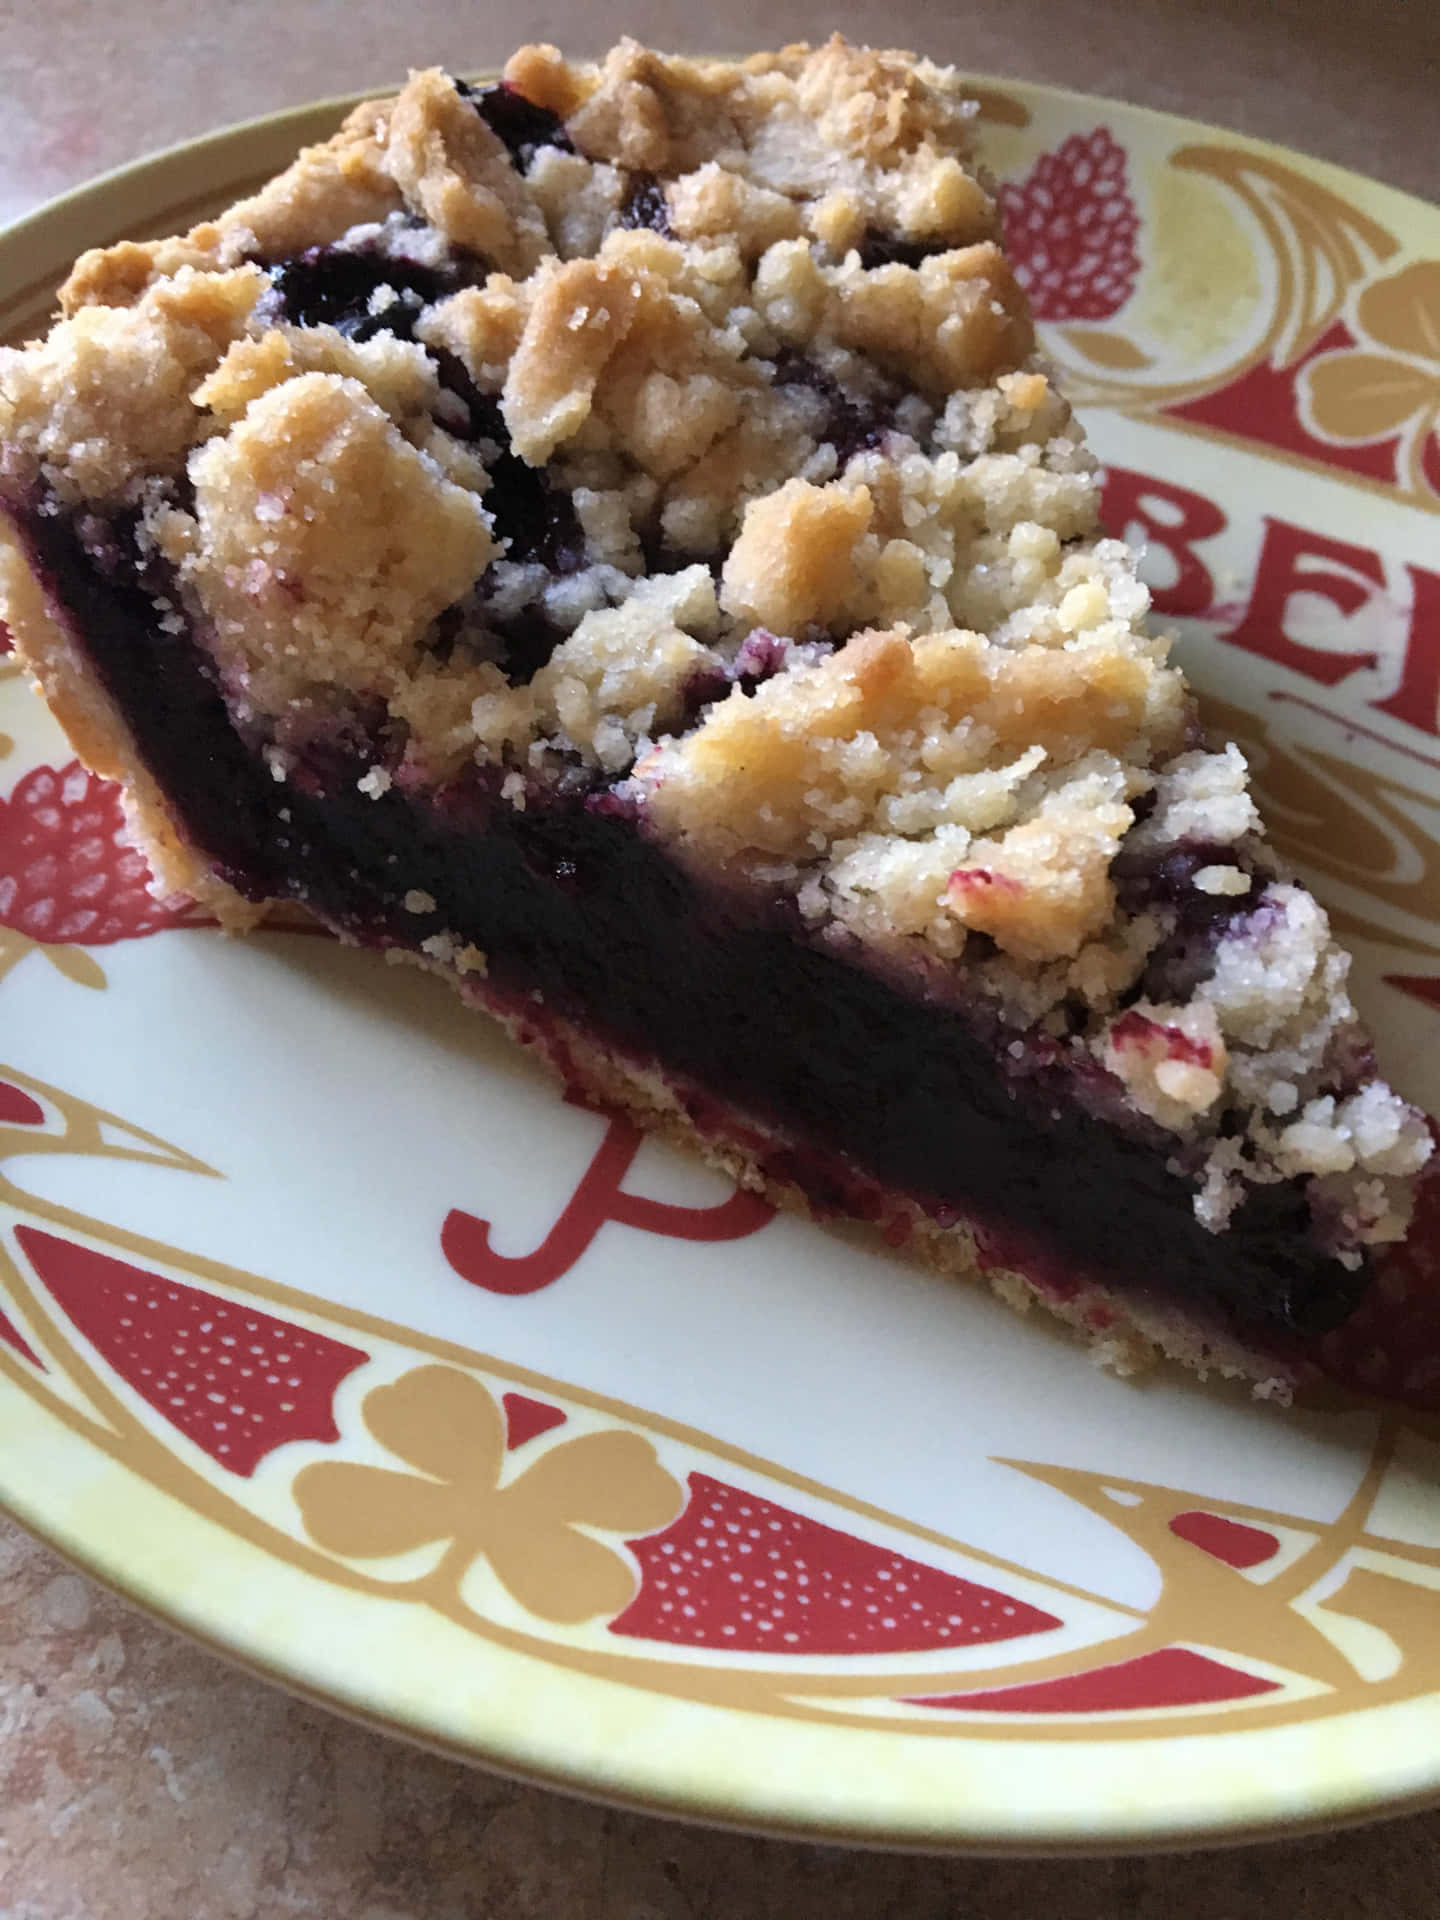 Yummy Home-made Blueberry Pie Wallpaper